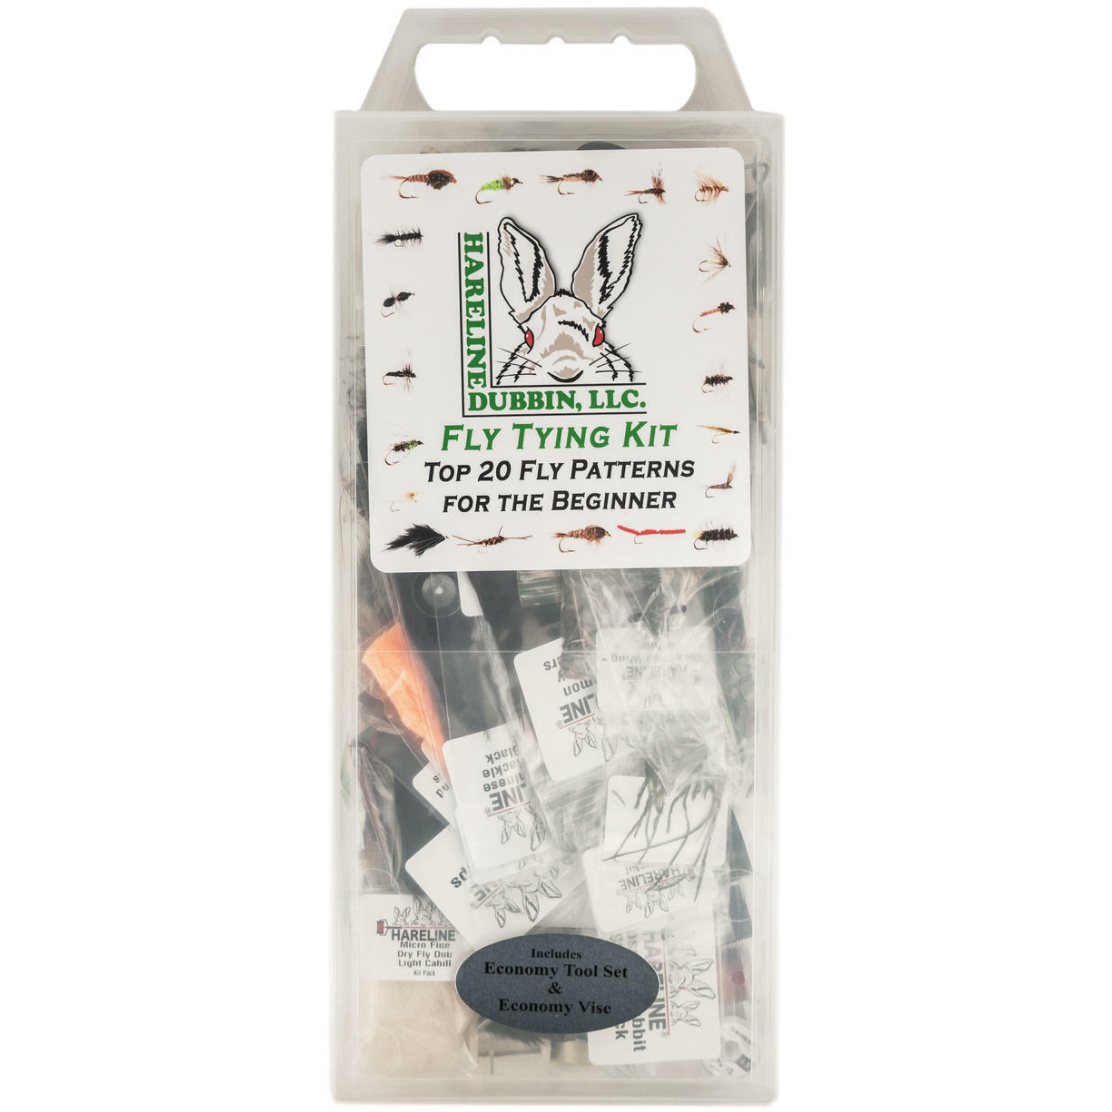 Hareline Fly Tying Material Kit With Economy Tools and Vise - Hareline  Dubbin